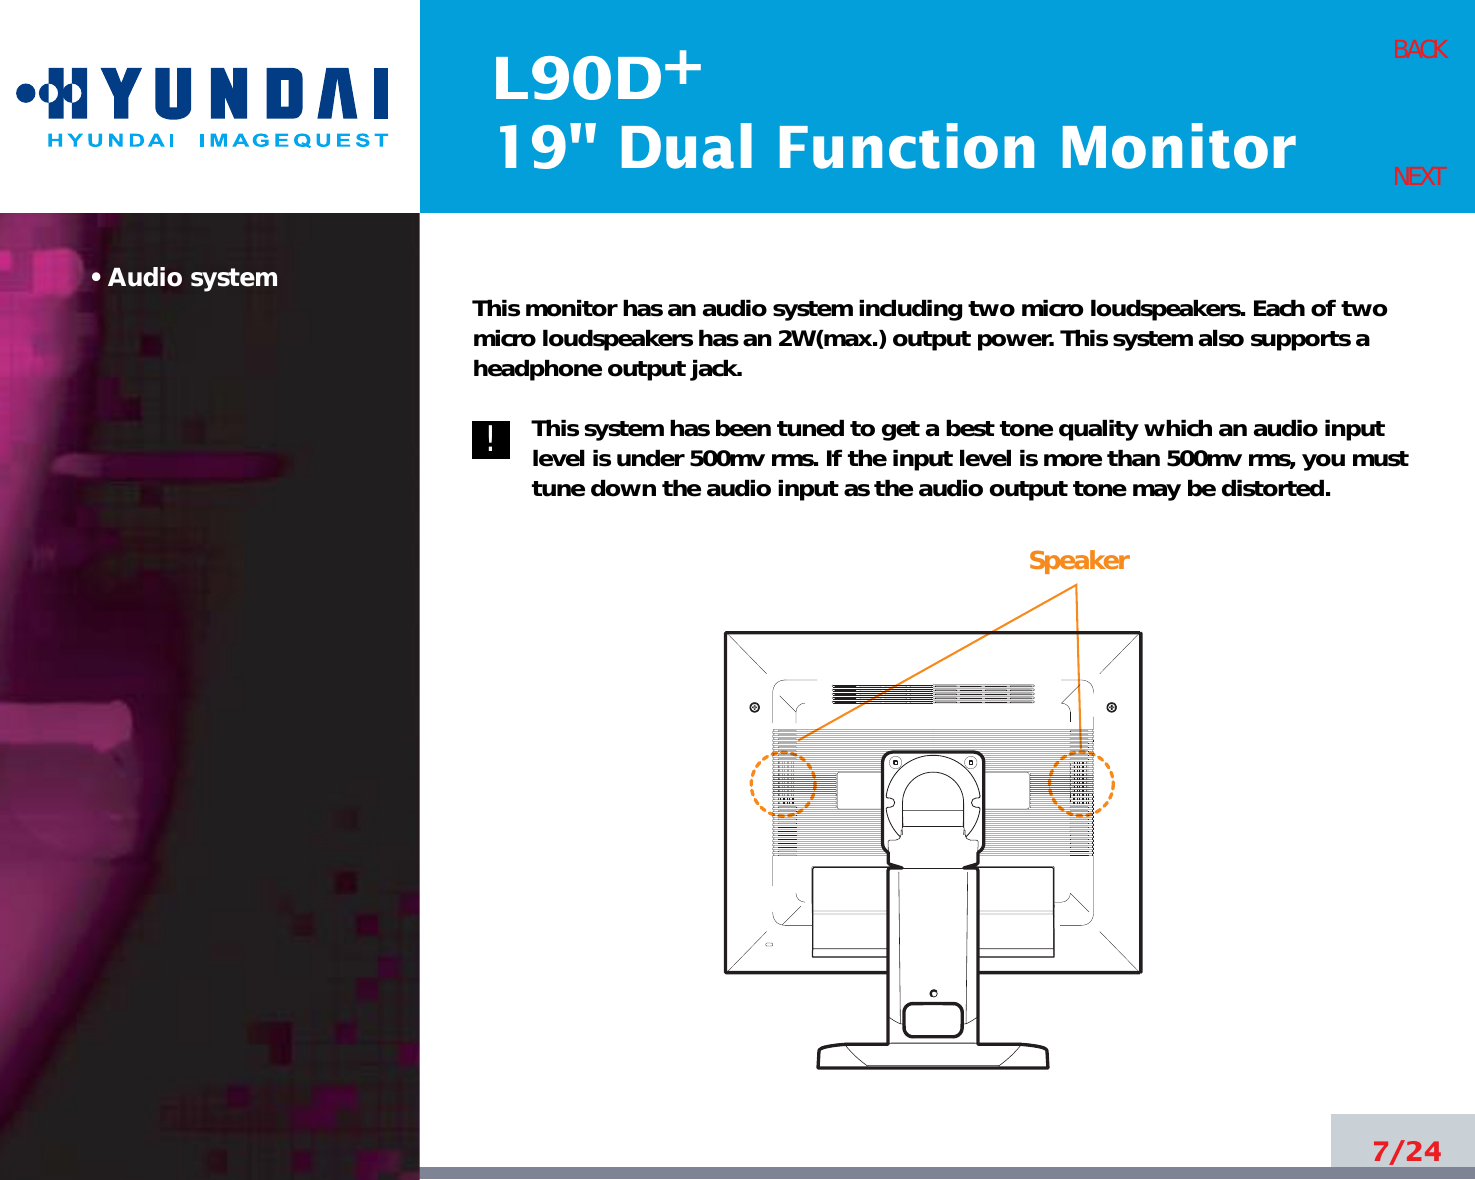 L90D19&quot; Dual Function Monitor+• Audio system This monitor has an audio system including two micro loudspeakers. Each of twomicro loudspeakers has an 2W(max.) output power. This system also supports aheadphone output jack.This system has been tuned to get a best tone quality which an audio inputlevel is under 500mv rms. If the input level is more than 500mv rms, you musttune down the audio input as the audio output tone may be distorted.7/24BACKNEXT!!Speaker